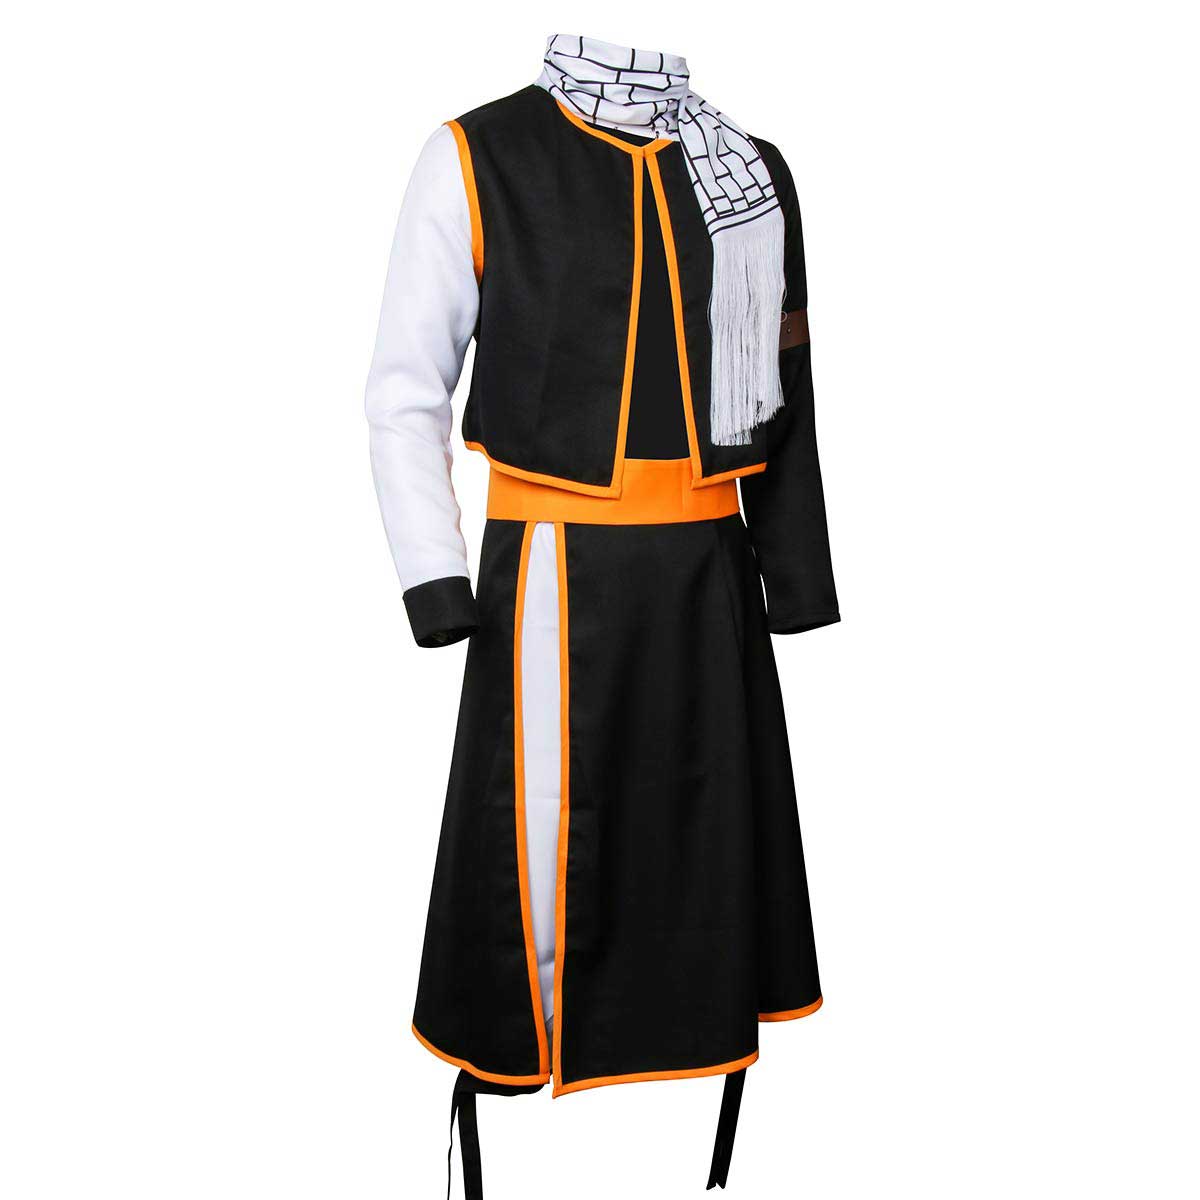 Fairy Tail Final Season Etherious Natsu Dragneel Halloween Cosplay Costume Outfits-Takerlama